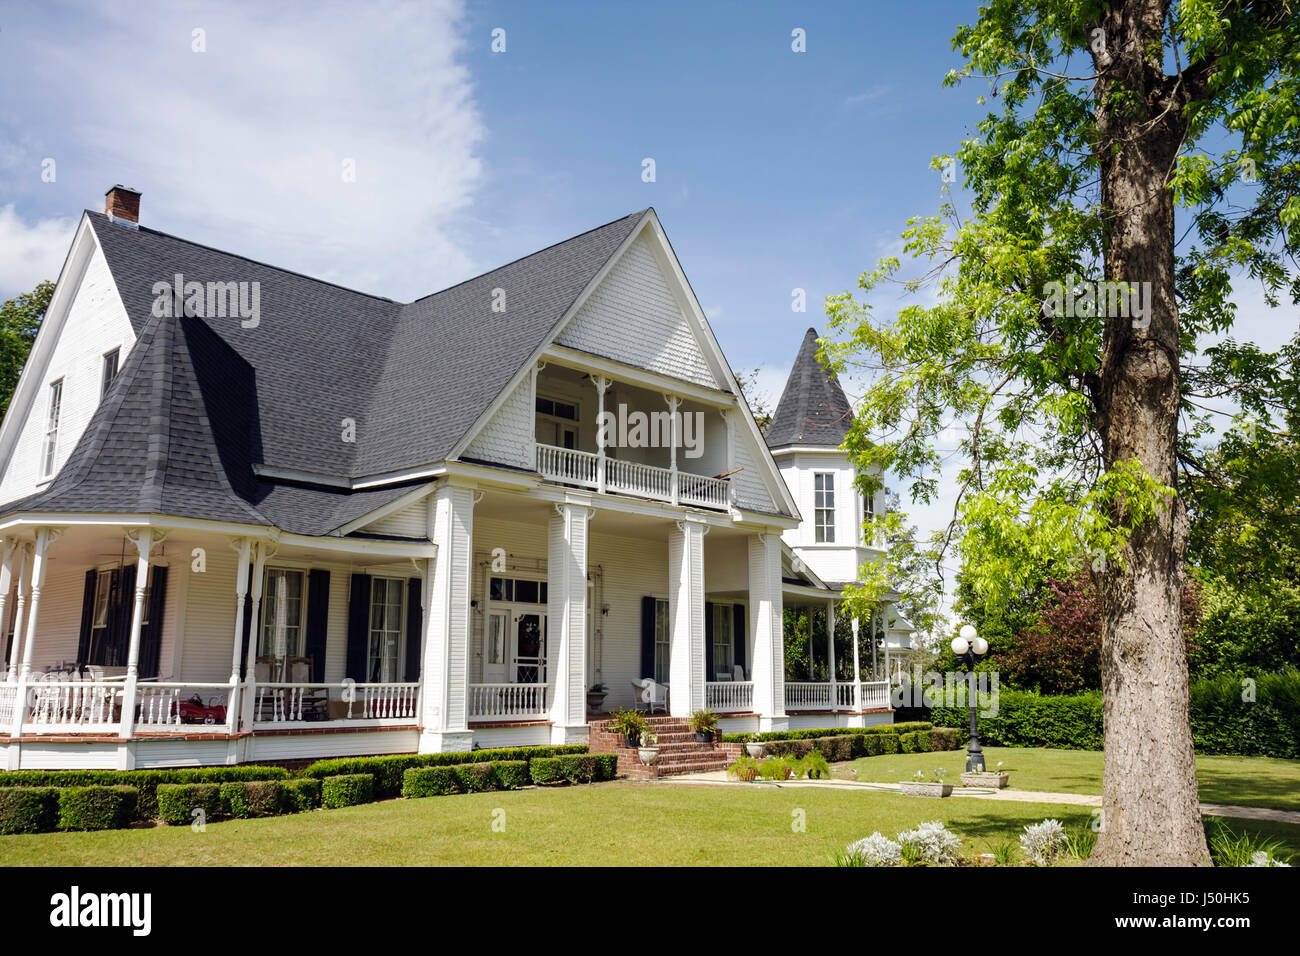 Monroeville Alabama,Pineville Road,historic homes,Hybart home,Queen Anne style,columns,wrap around porch,turret,gabled roof,front yard,tree,AL08051502 Stock Photo